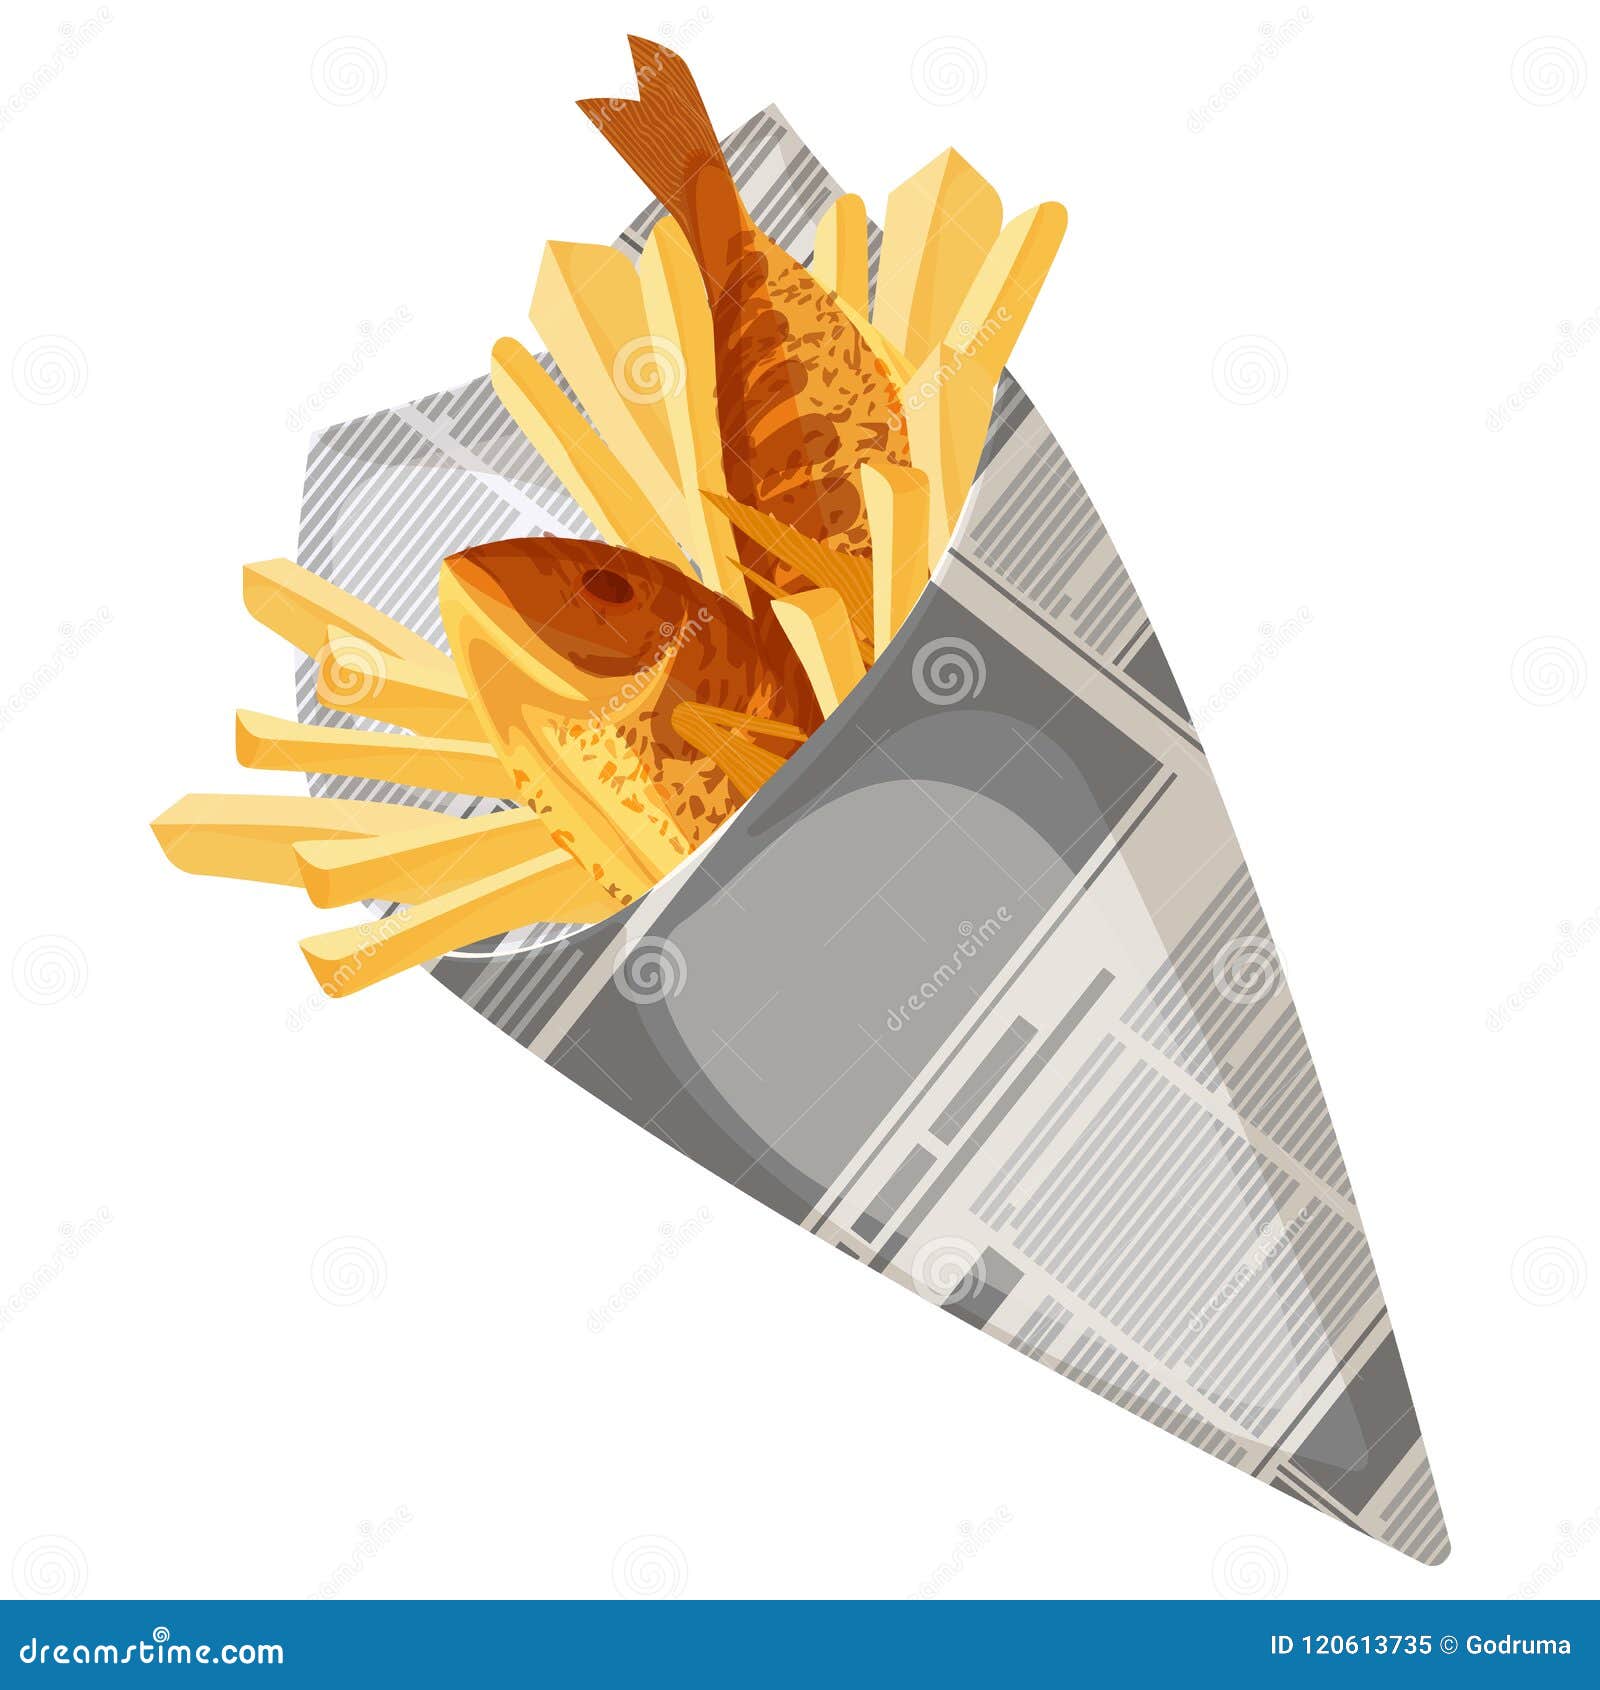 Fish & Chips Traditional Newspaper Fish and Chips Fries Style Cones Fast Food 